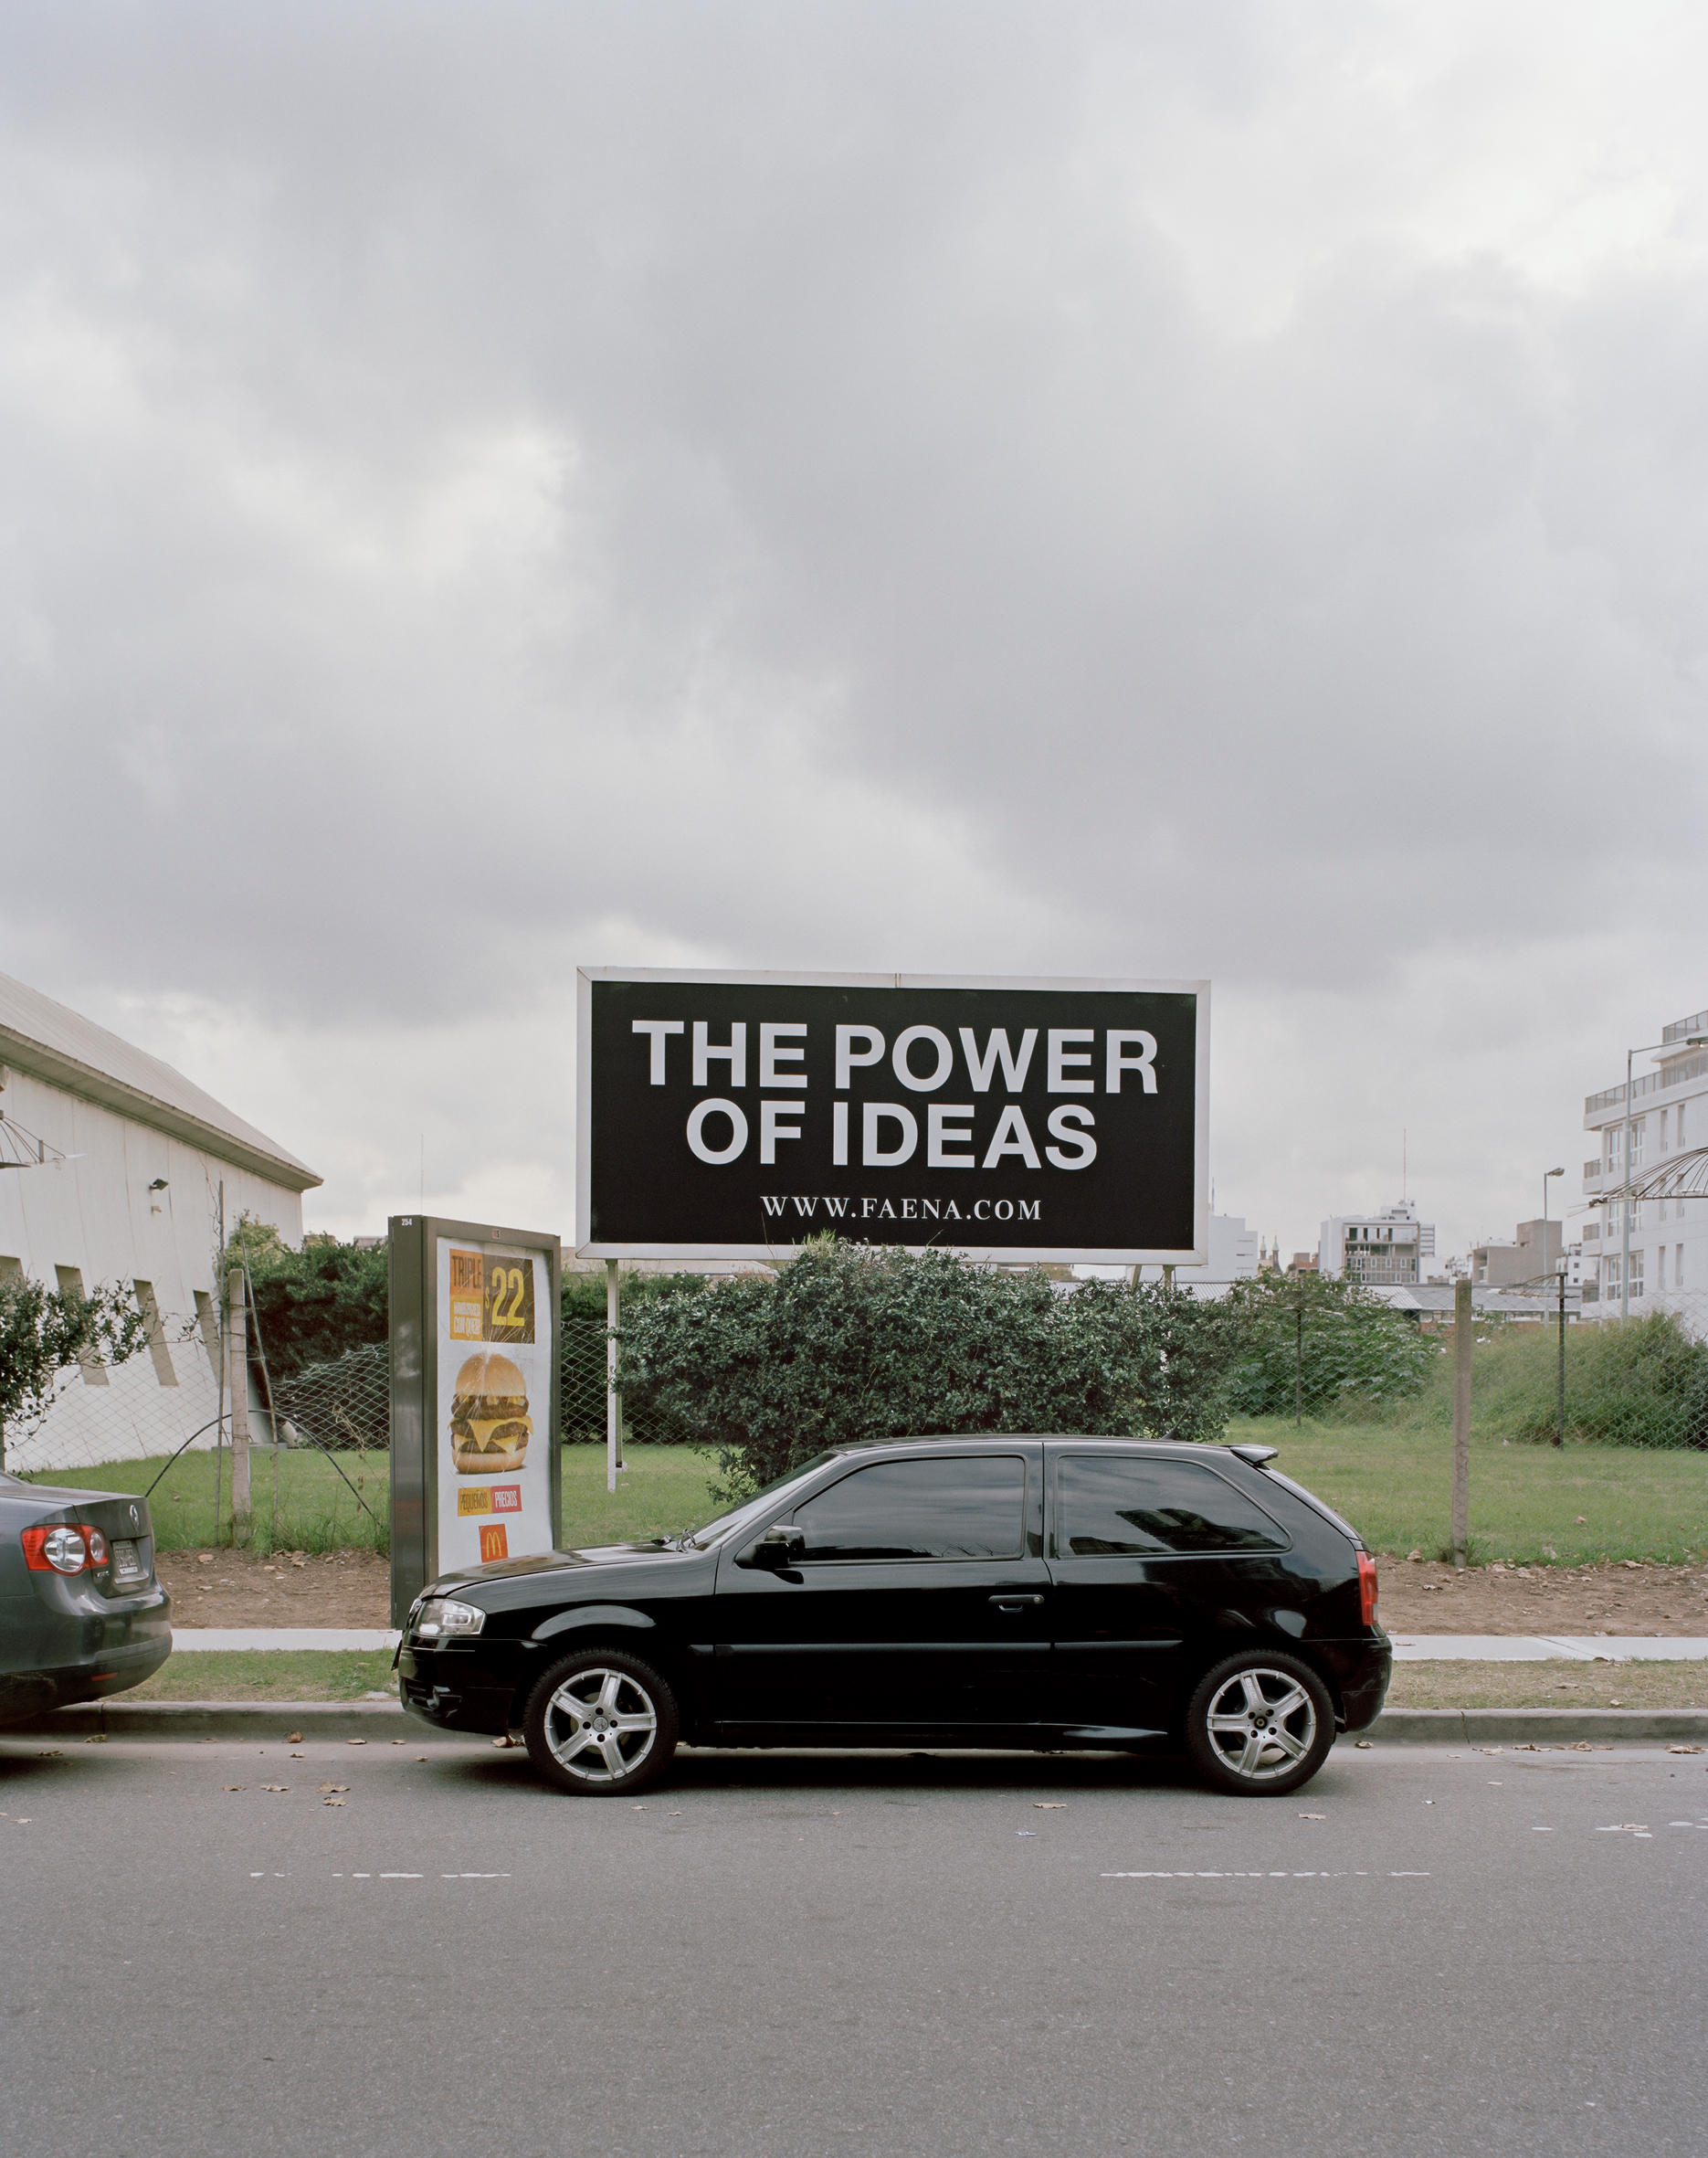 Photo of a small black car, parked on a road in front of a billboard.